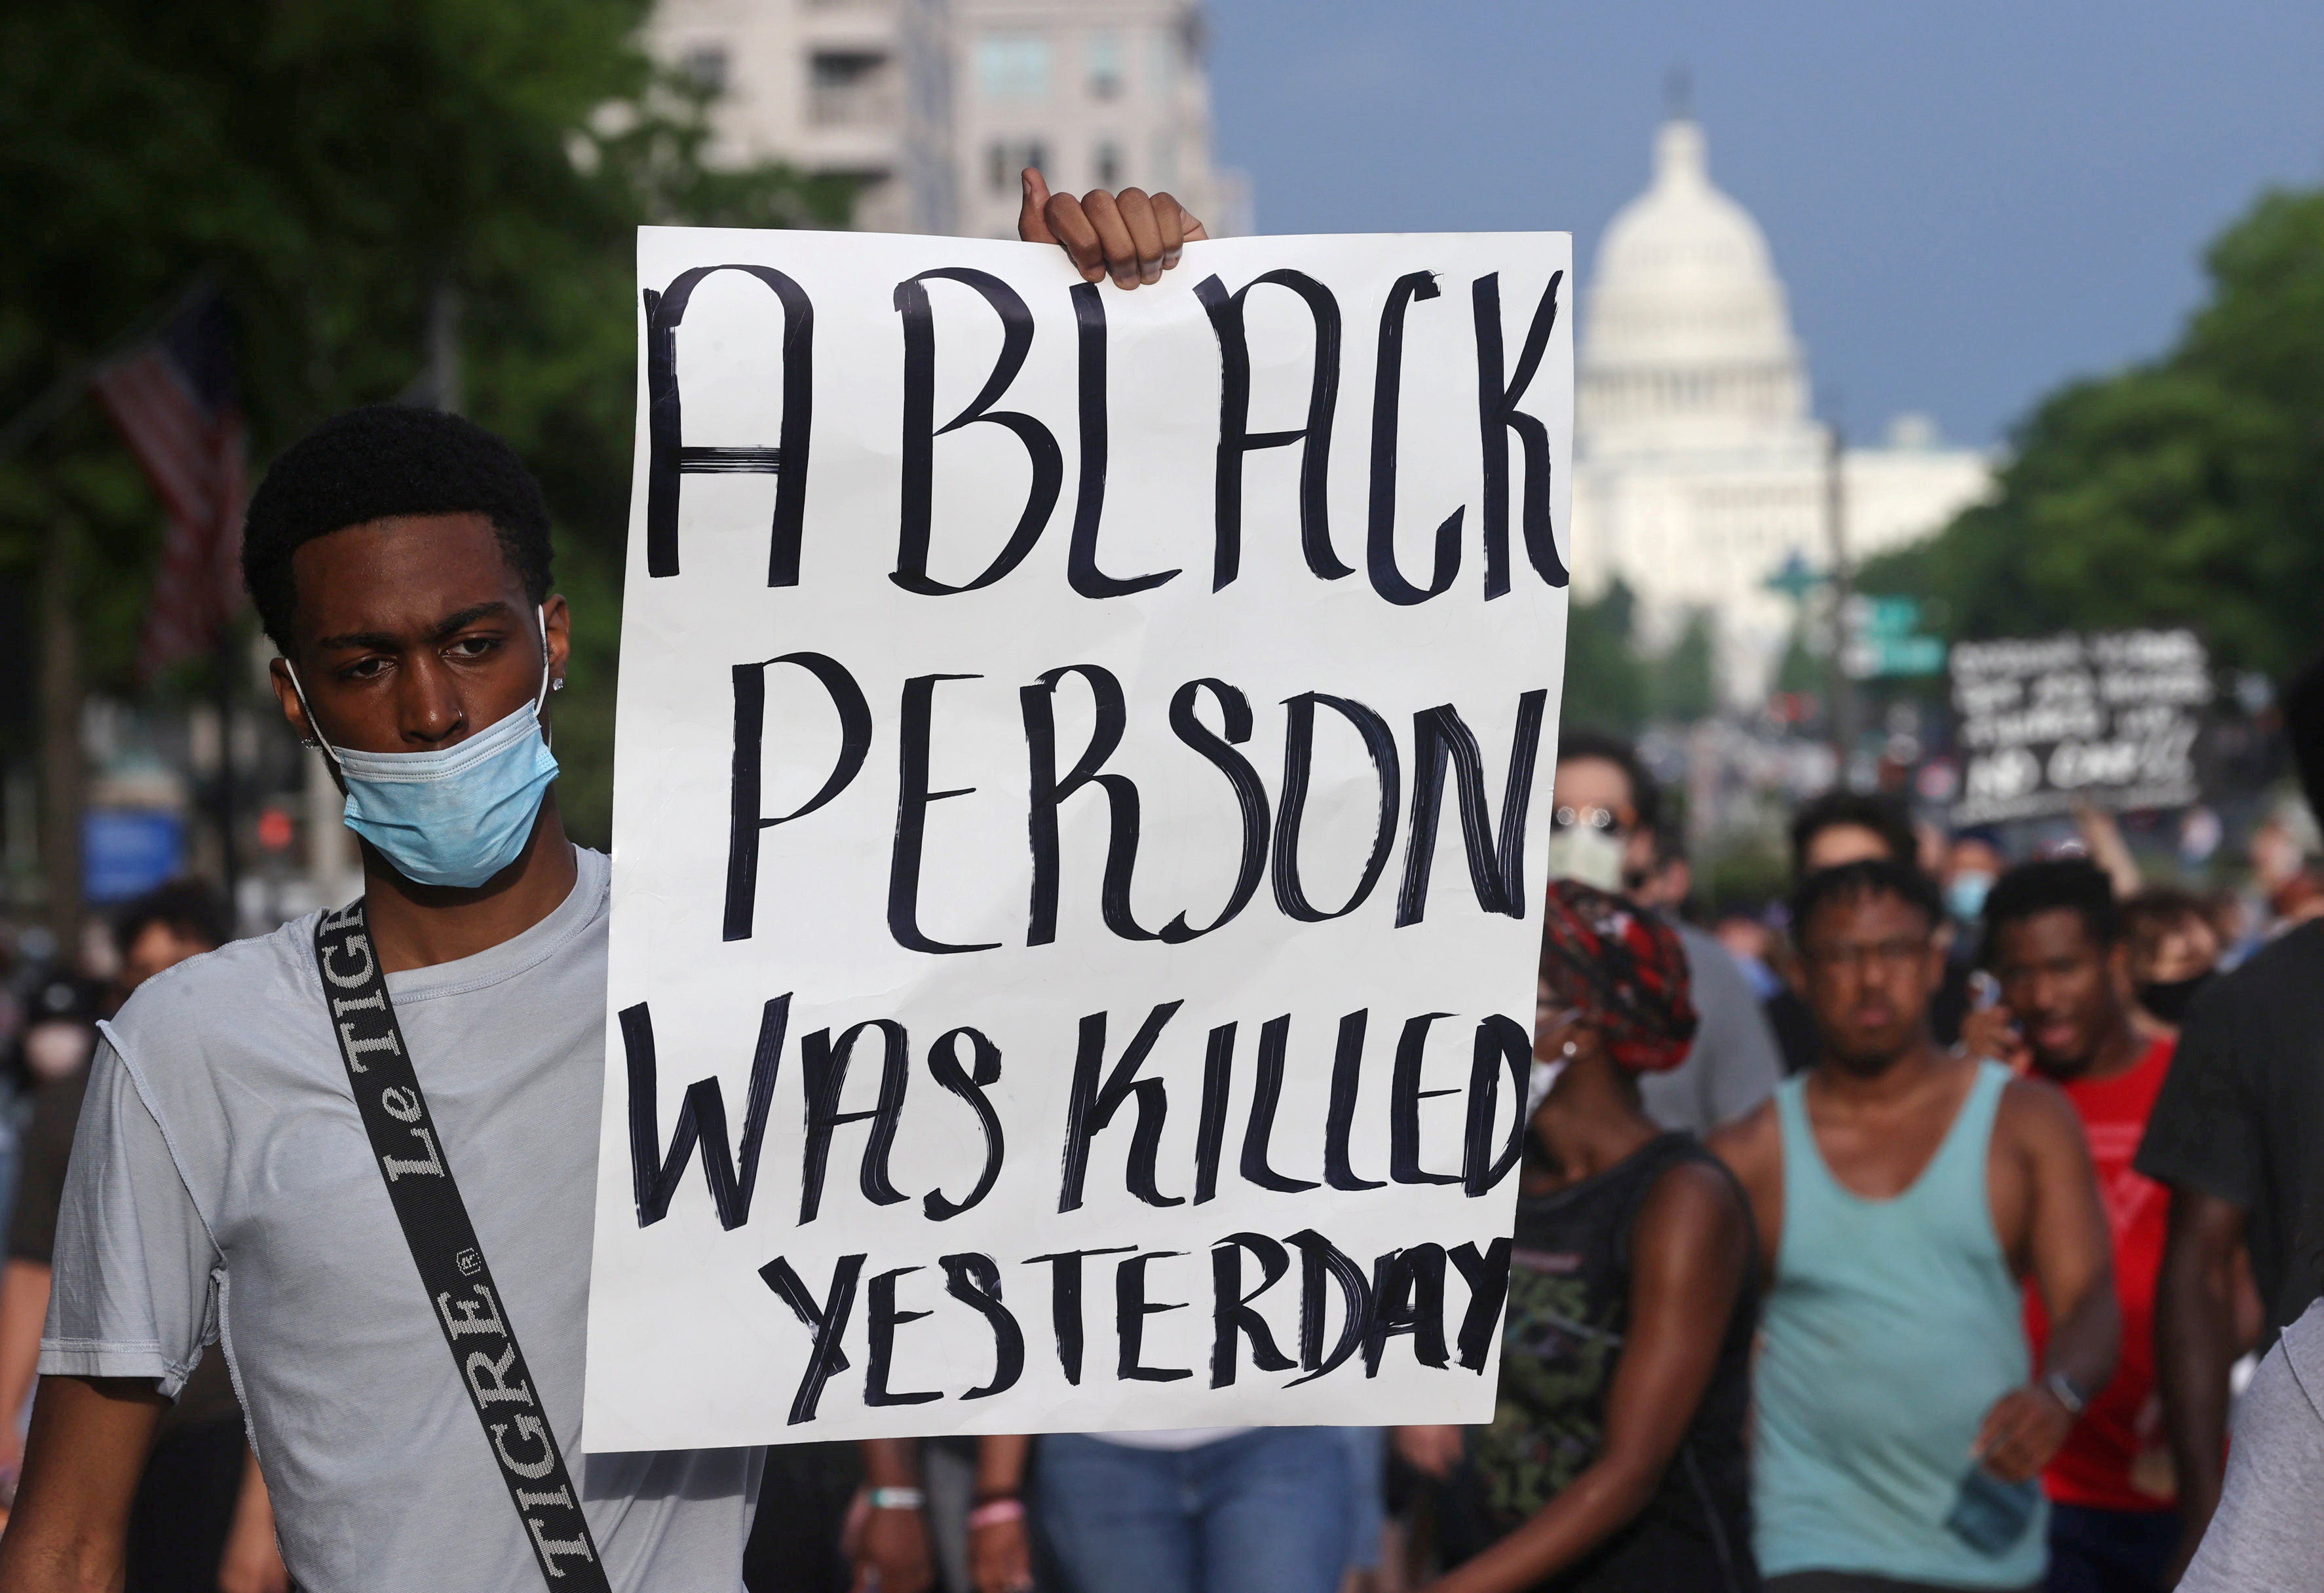 A protester holds a sign as he attends a protest near the White House during a rally and march against the death in Minneapolis police custody of African-American man George Floyd, in Washington May 29, 2020. u00e2u20acu201d Reuters pic